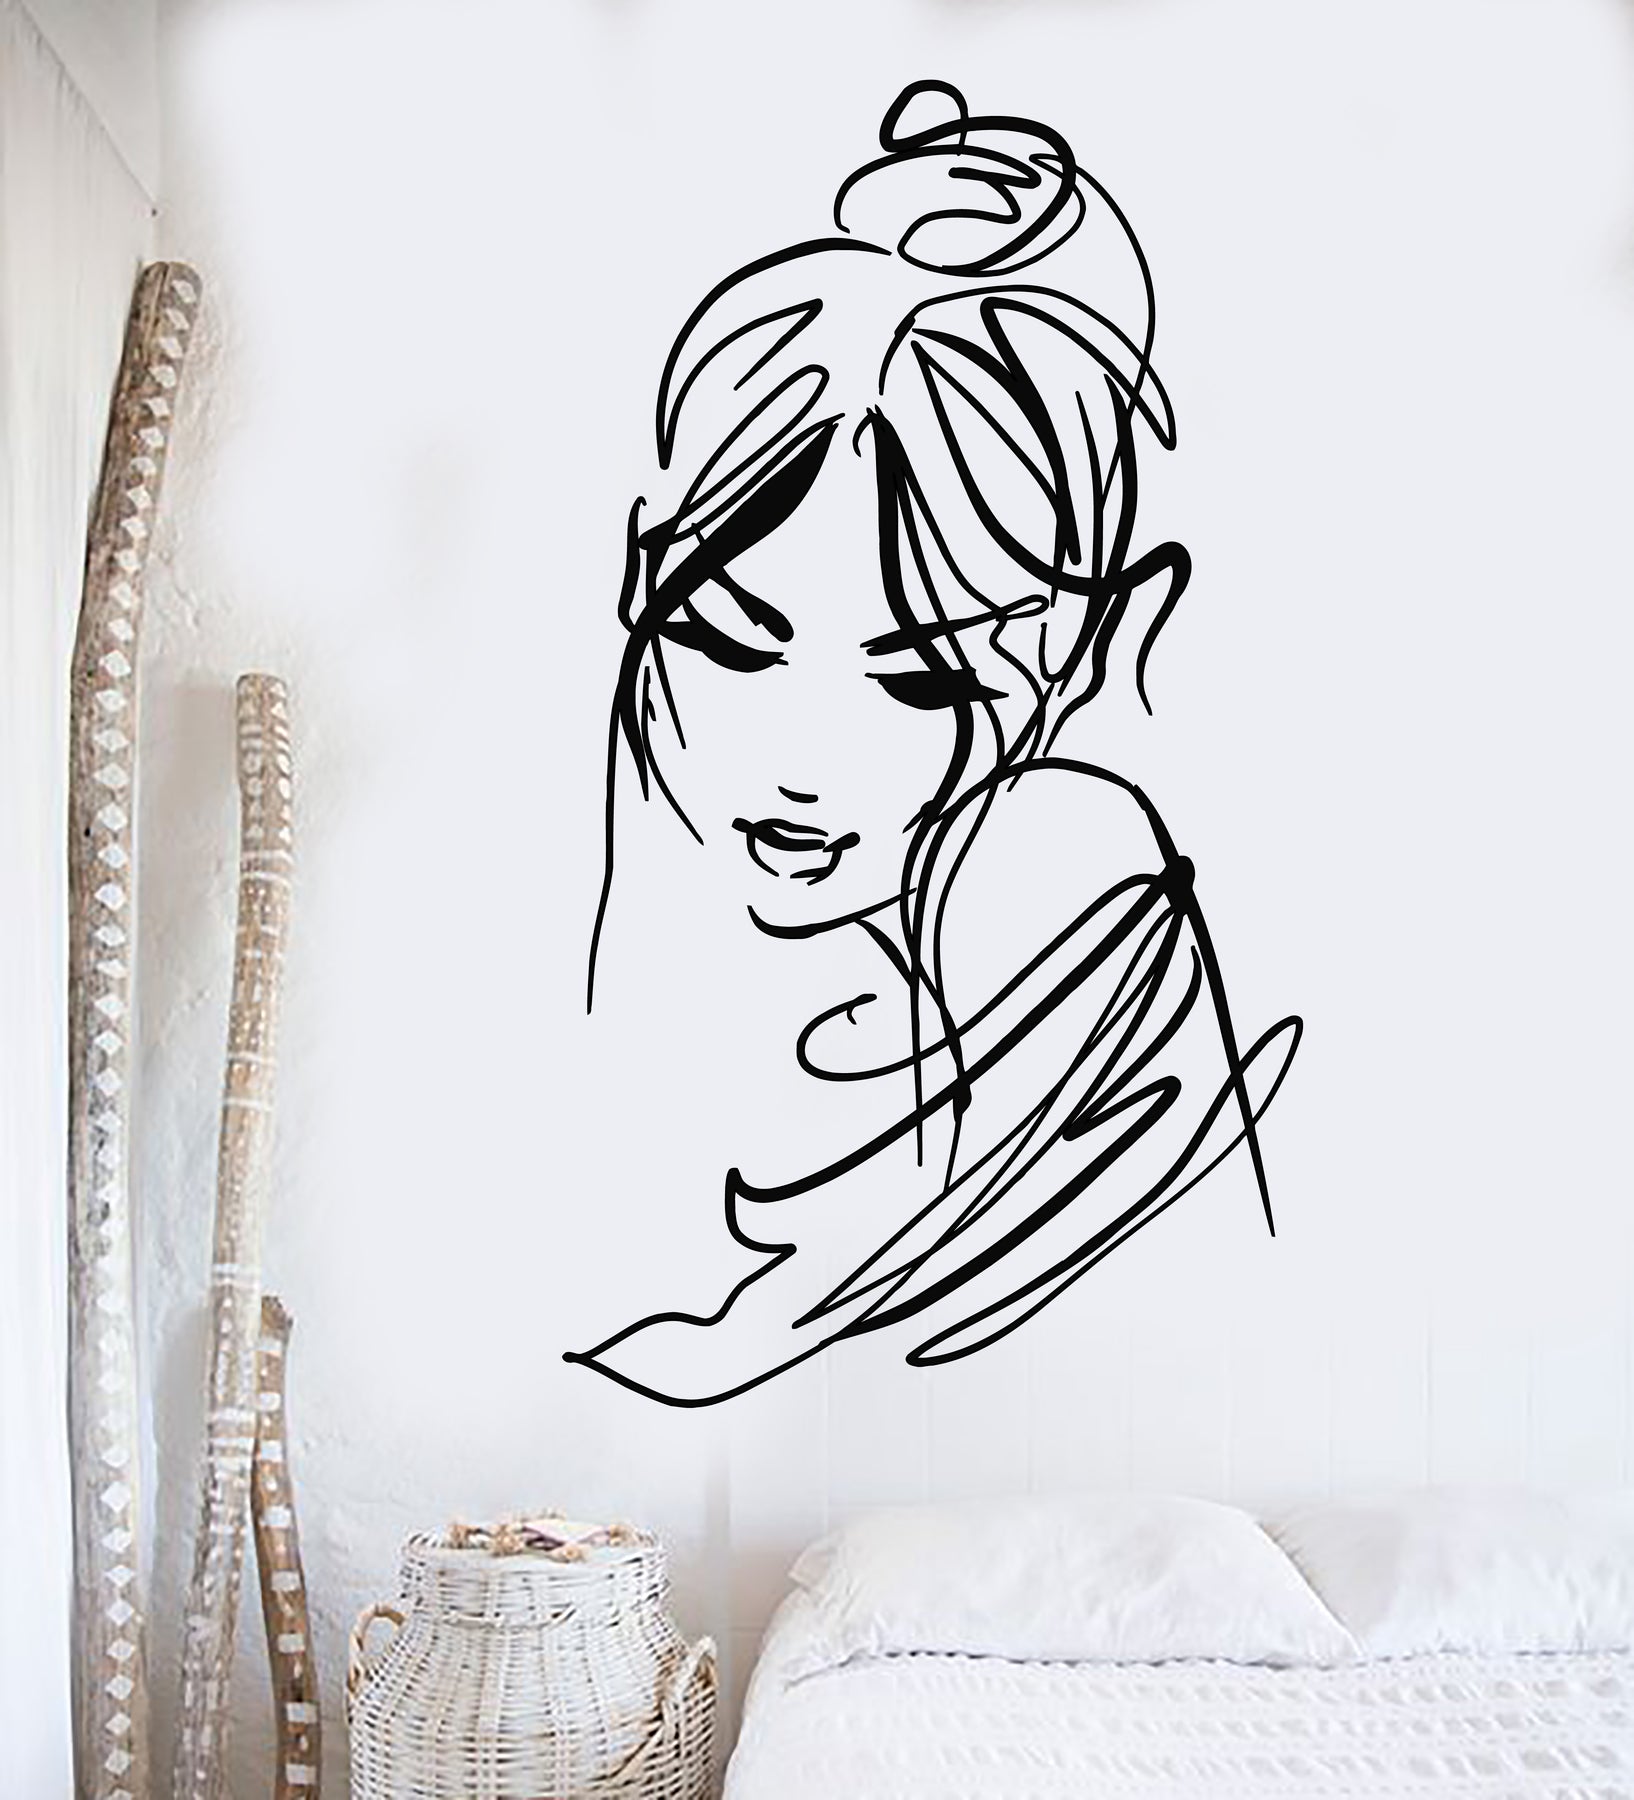 Buy Woman Body 3D Black Wooden Wall Art at 40% OFF by Sketch Designs |  Pepperfry